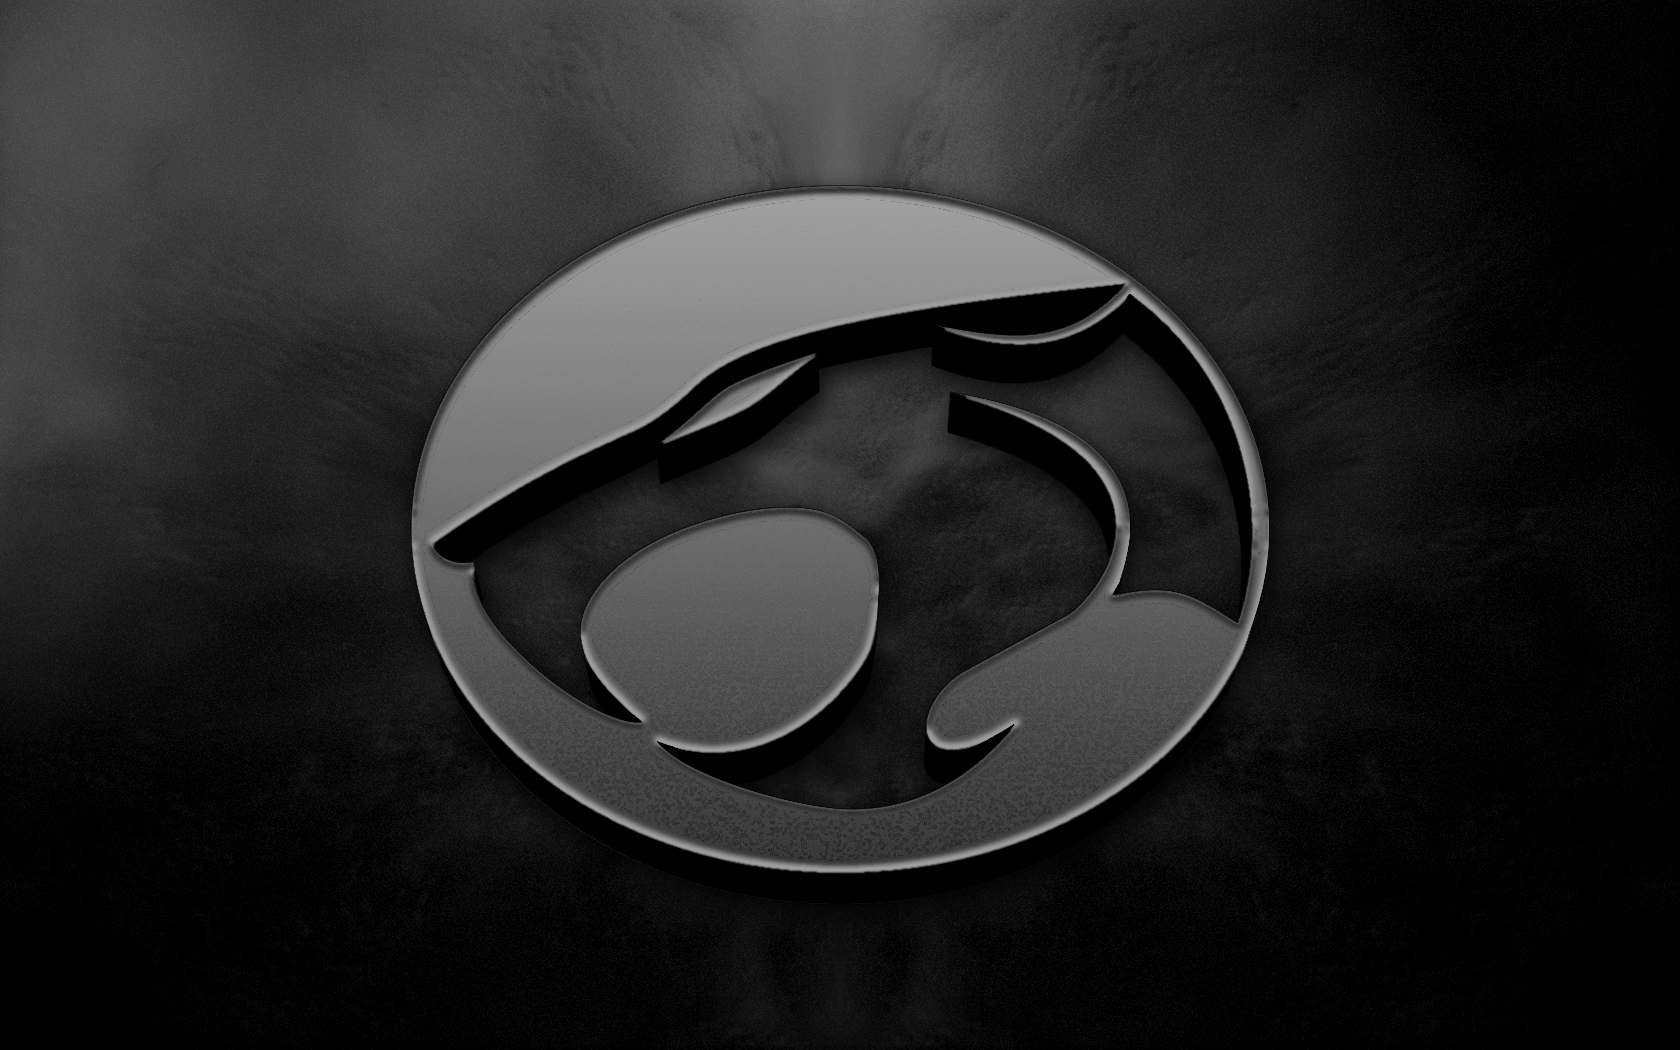 Thundercats logos wallpaper - High Quality and other